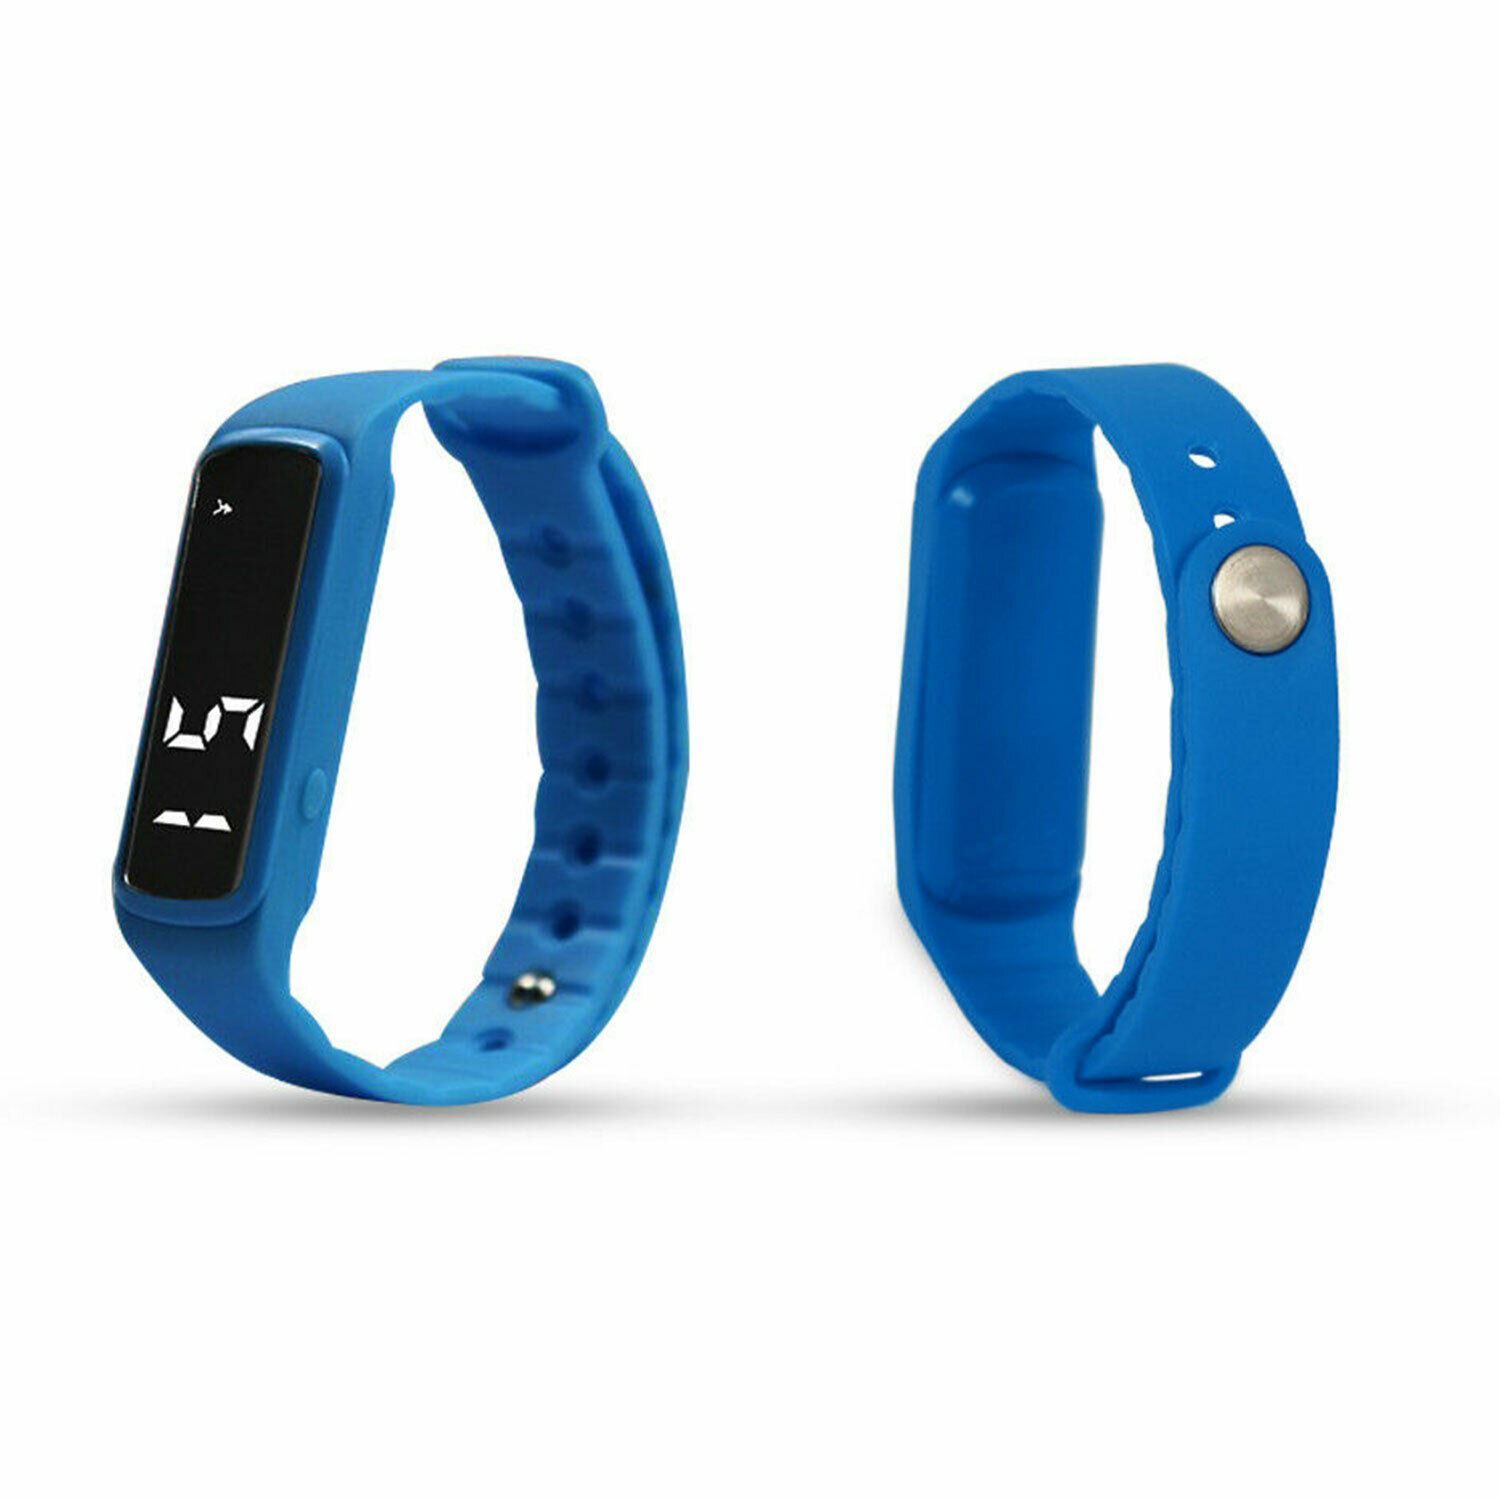 This multi-function activity watch helps children get interested in setting and achieving health and fitness goals. Sometimes, it’s challenging to keep kids in action. However, giving them a fitness band can lure them to take more steps. Who doesn’t want to see a high number on their tracker at the end of the day?

Key Features :
Non-Bluetooth Fitness tracker for Kind.
3D Pedometer and temperature counter.
Silent flash and Calorie, distance, Time/date remind.
Autosaves data and sleep monitor.
Rechargeable polymer battery.

Technical Specifications :
Temperature Rage : -9 ºC —50ºC
Data Transfer Mode: USB Port
Accuracy : +-1%
Data memory: 24 hours step counter, save 14 days data

Number of steps: Unlimited
Battery Life : >300 times charge-discharge cycles
Voltage: DC=5V
Atmospheric pressure : 860hPa-1060hPa
Operating Temperature: 0-45 ºC

Product Specifications:
Brand: Aquarius 
Materials: Rubber
Model: AQ114
Weight: 42g
Display: LED Display
Product Dimensions: 8x9x3cm

Package Includes: 1x Aquarius AQ 114 Teen Fitness Tracker